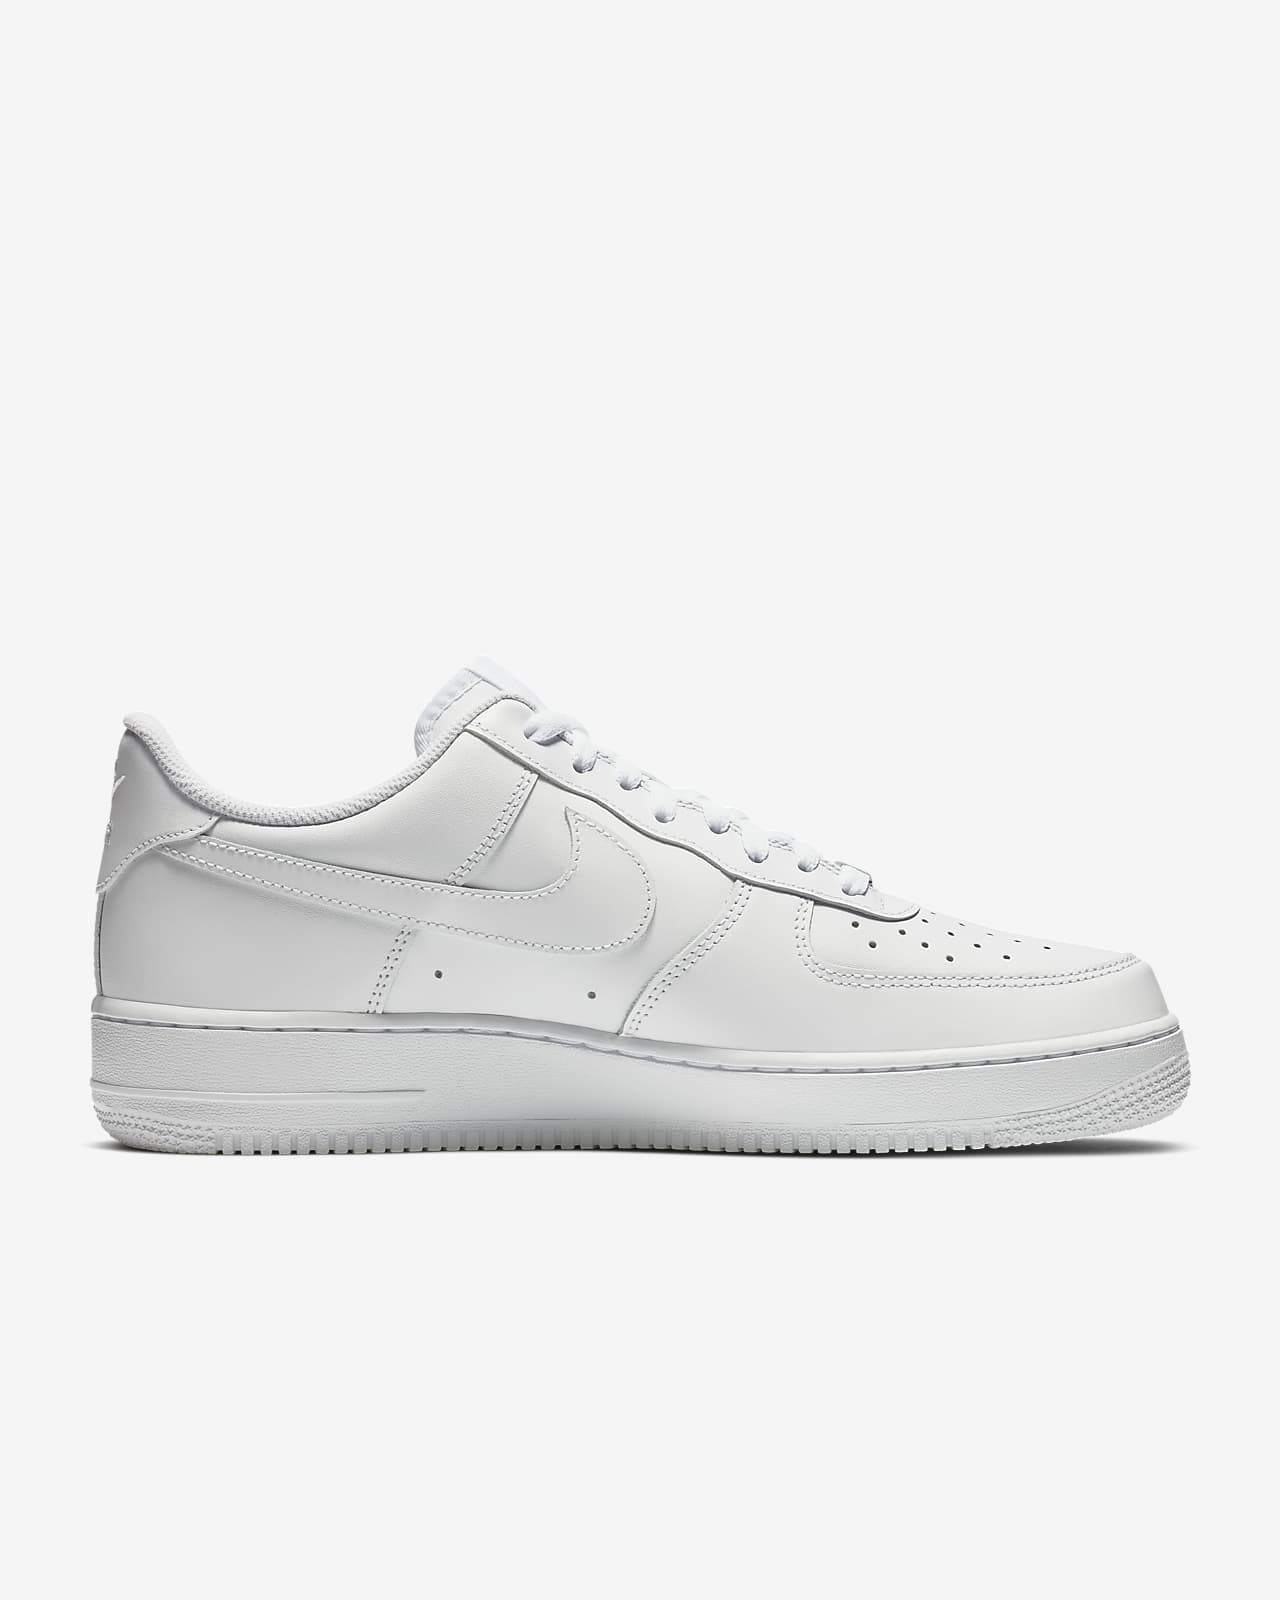 nike force one blancas hombre